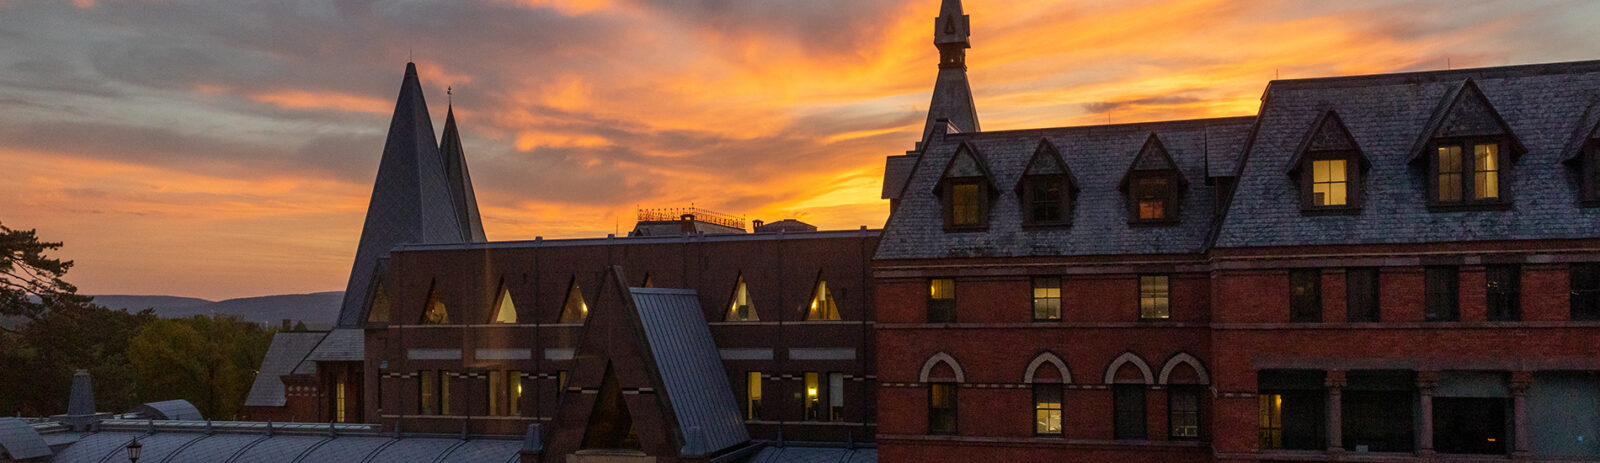 Sage Hall with a vibrant sunset behind the building.